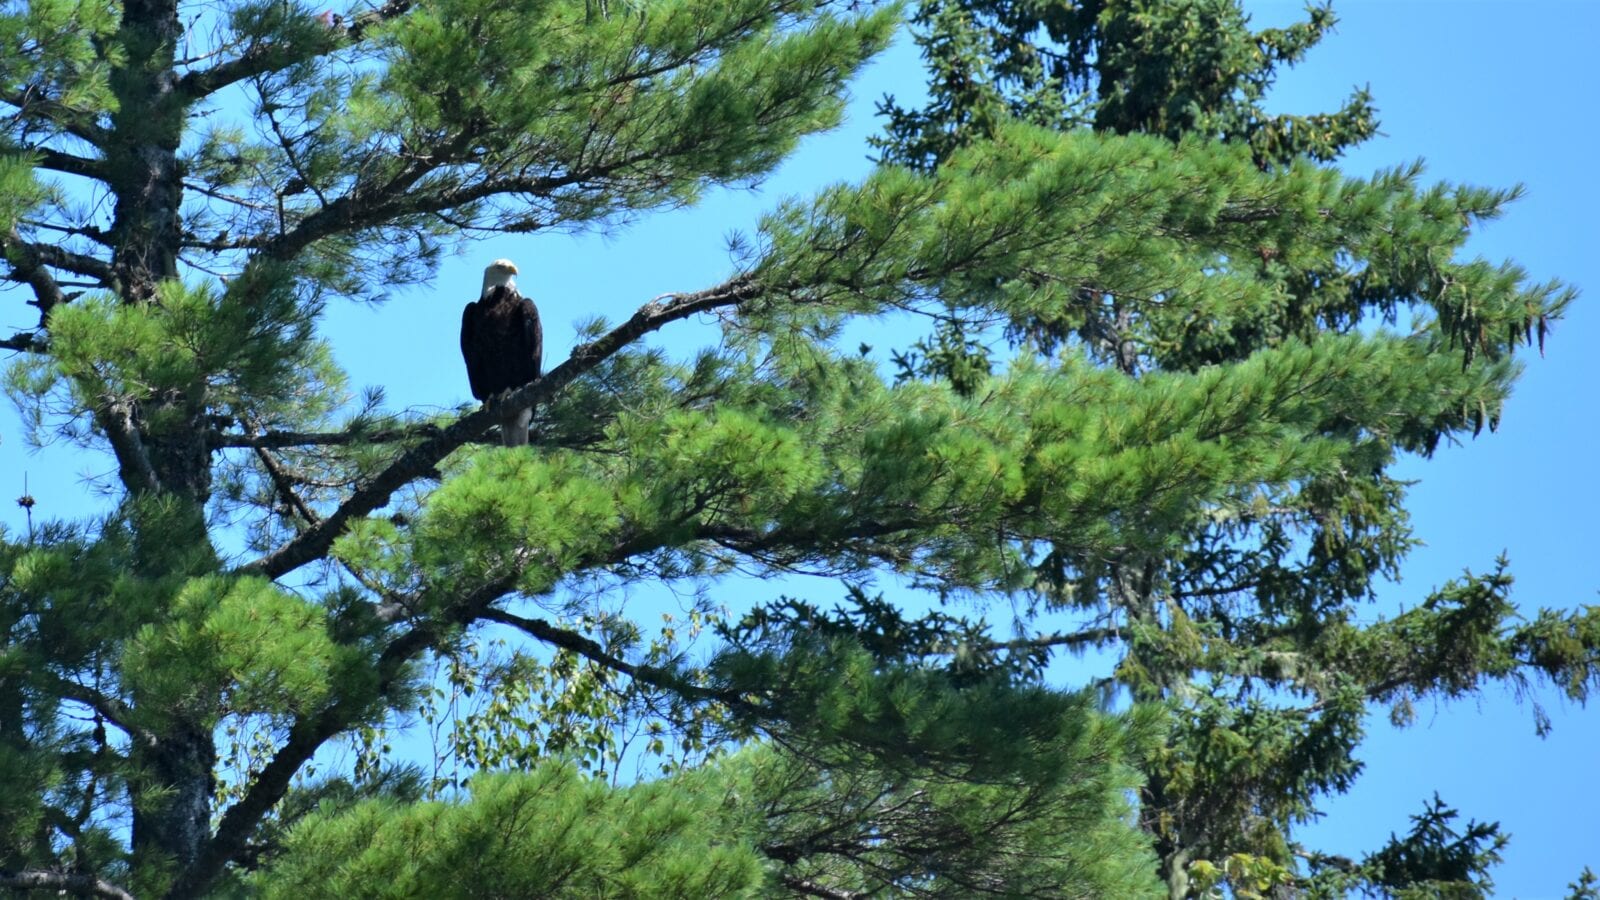 photo of bald eagle sitting on tree branch